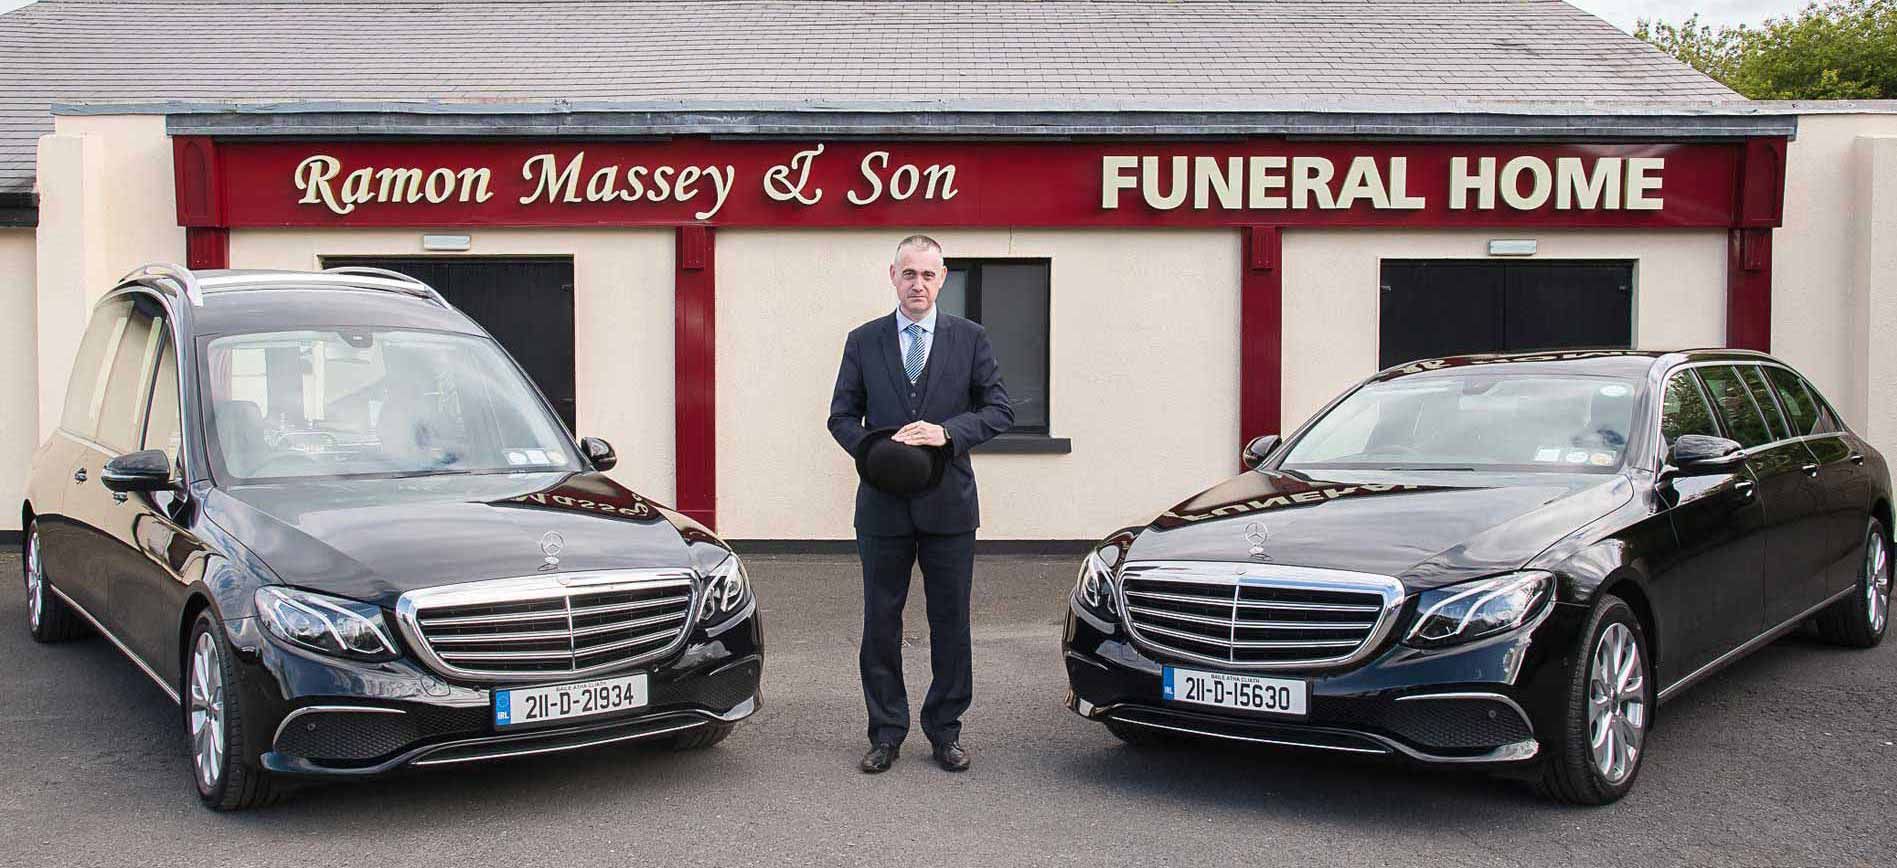 Outside of the Massey Ramon & Son funeral home in Kildare